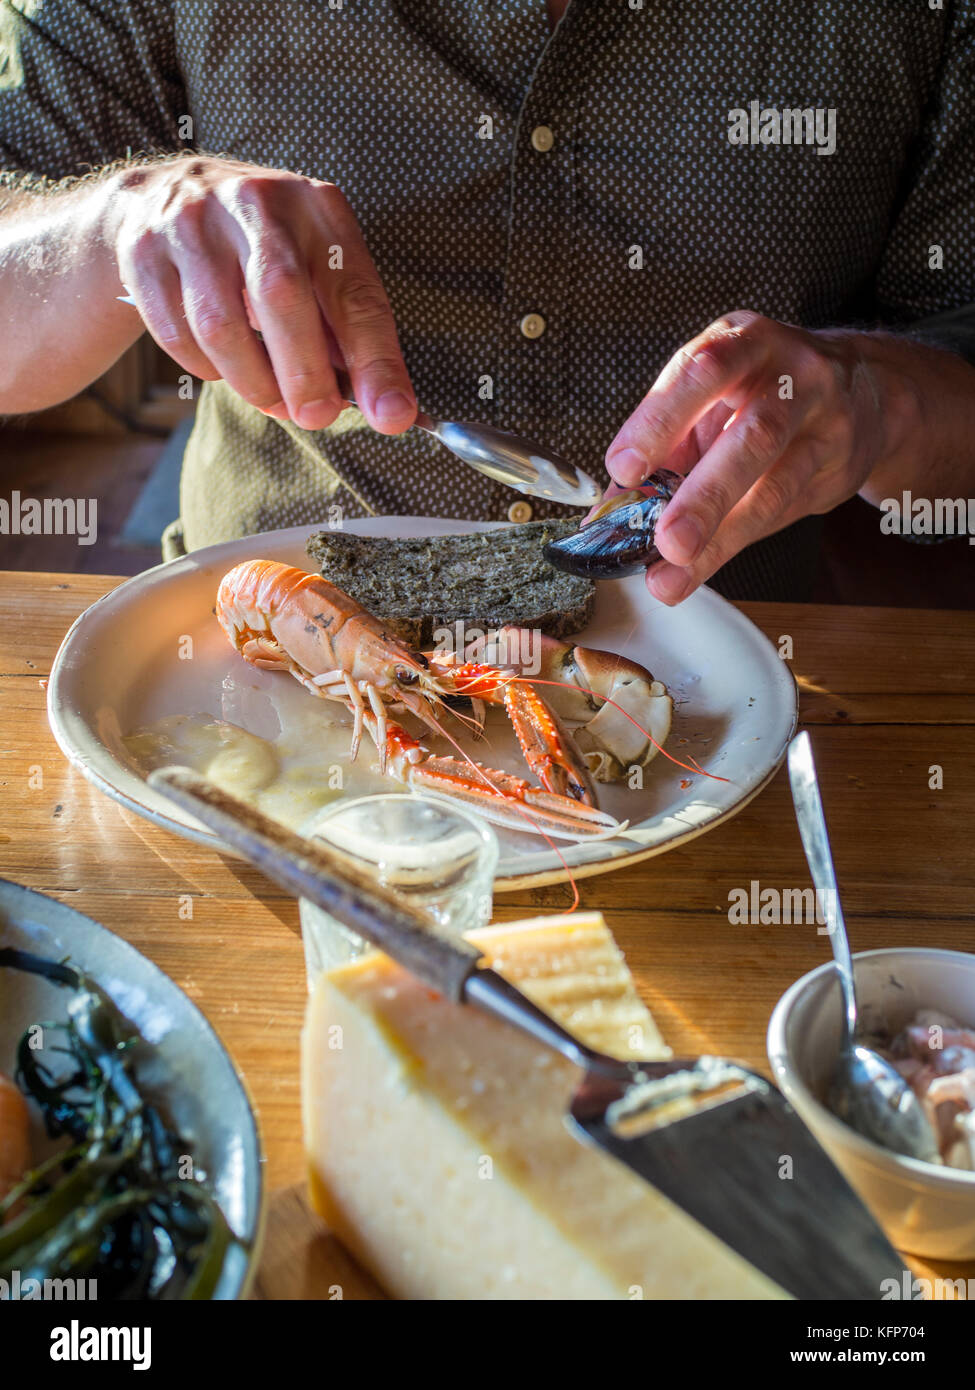 A seafood platter at Everts Sjöbod’s, a business offering oyster safaris,meals and accommodation out of a 19th century boathouse in Grebbstad. Stock Photo